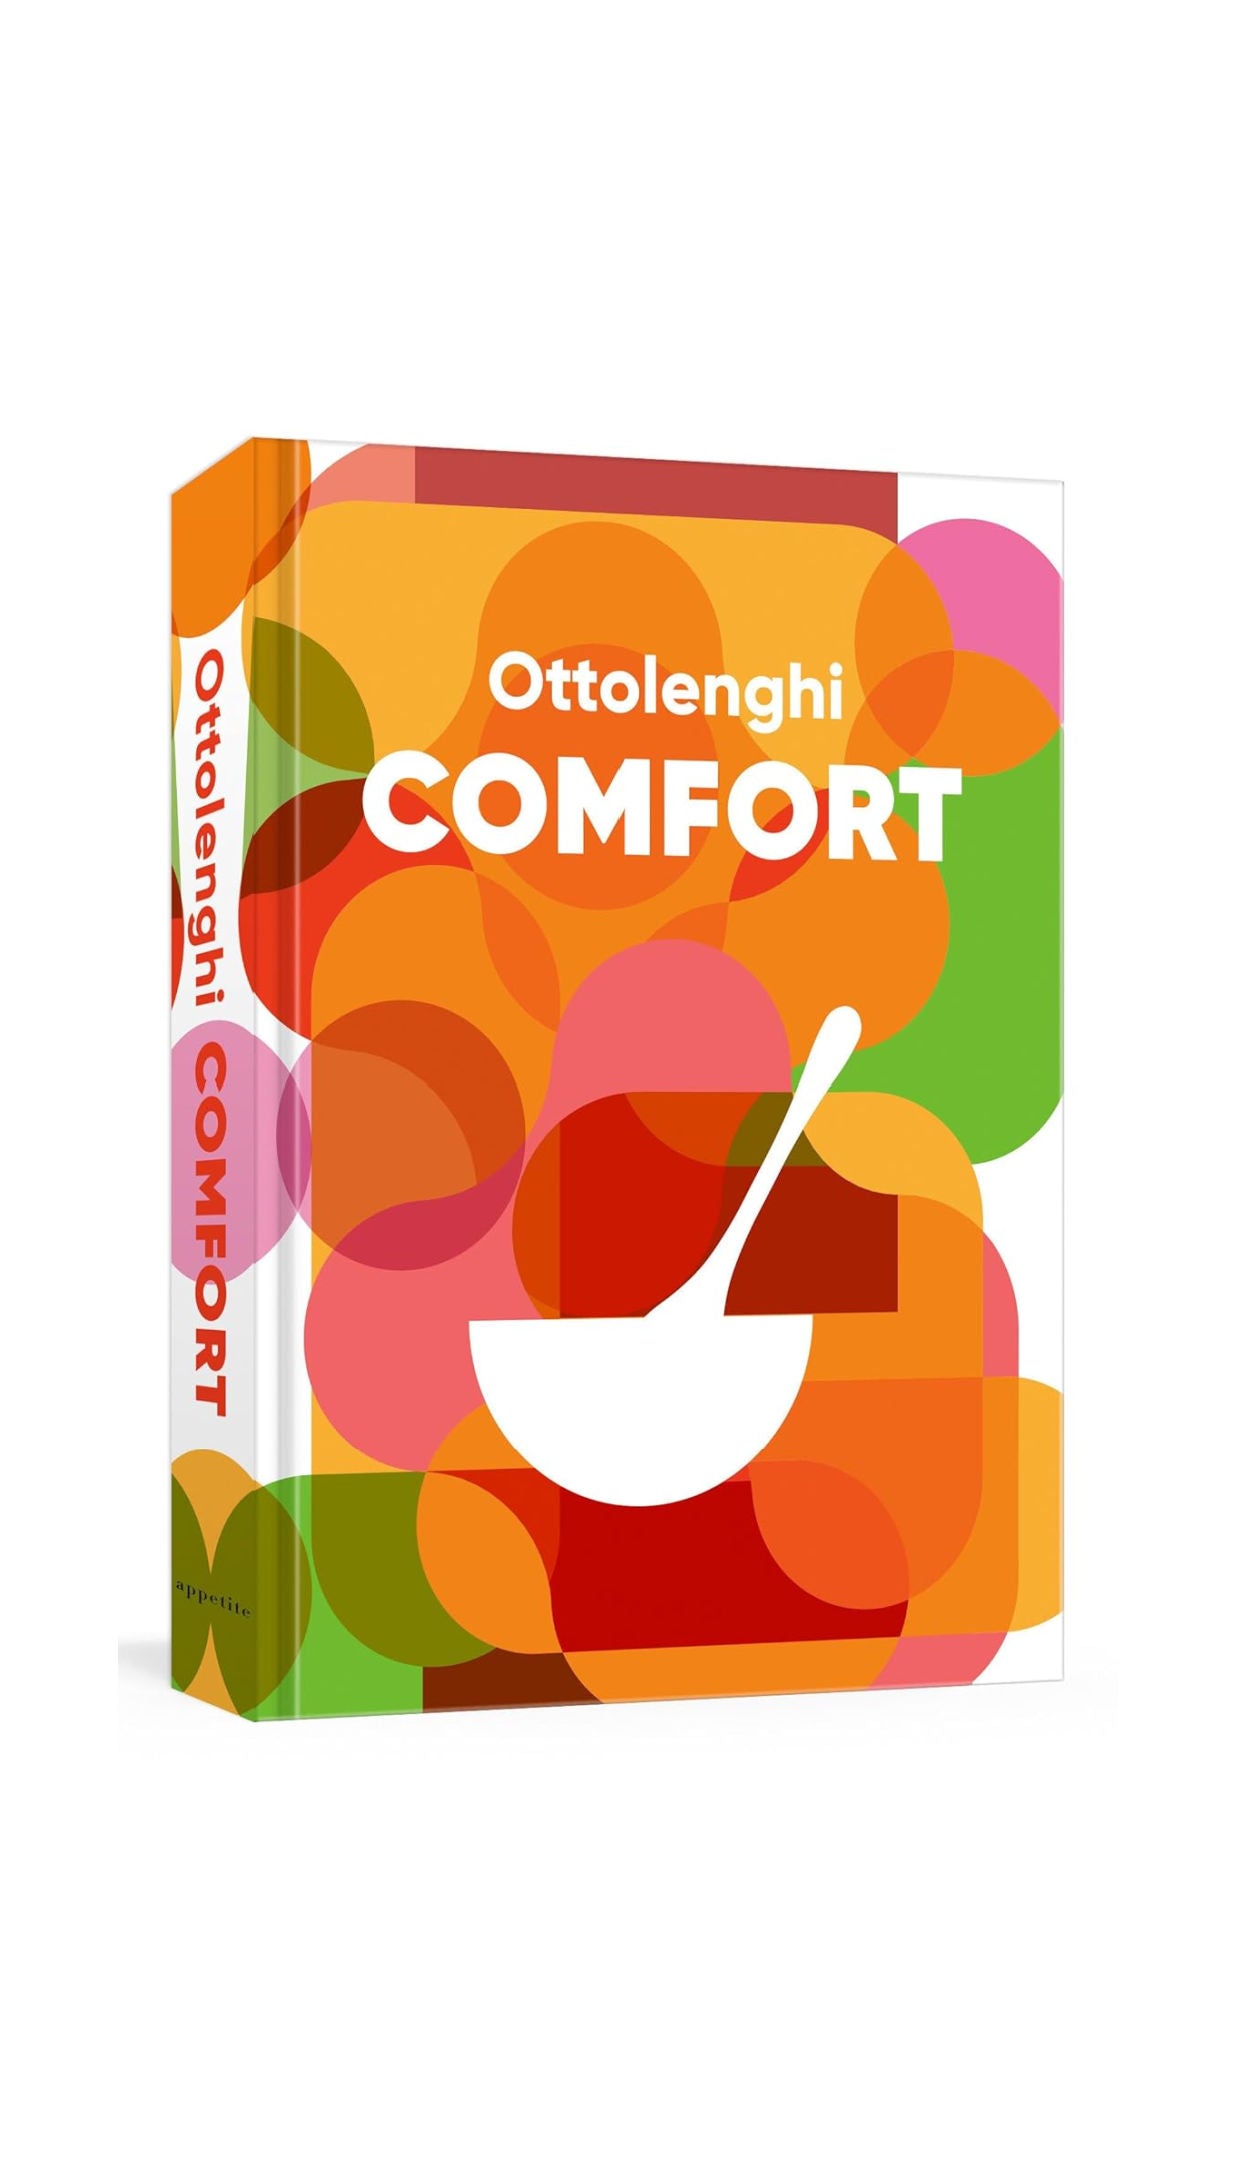 Ottolenghi Comfort / COMING OCT. 8TH!